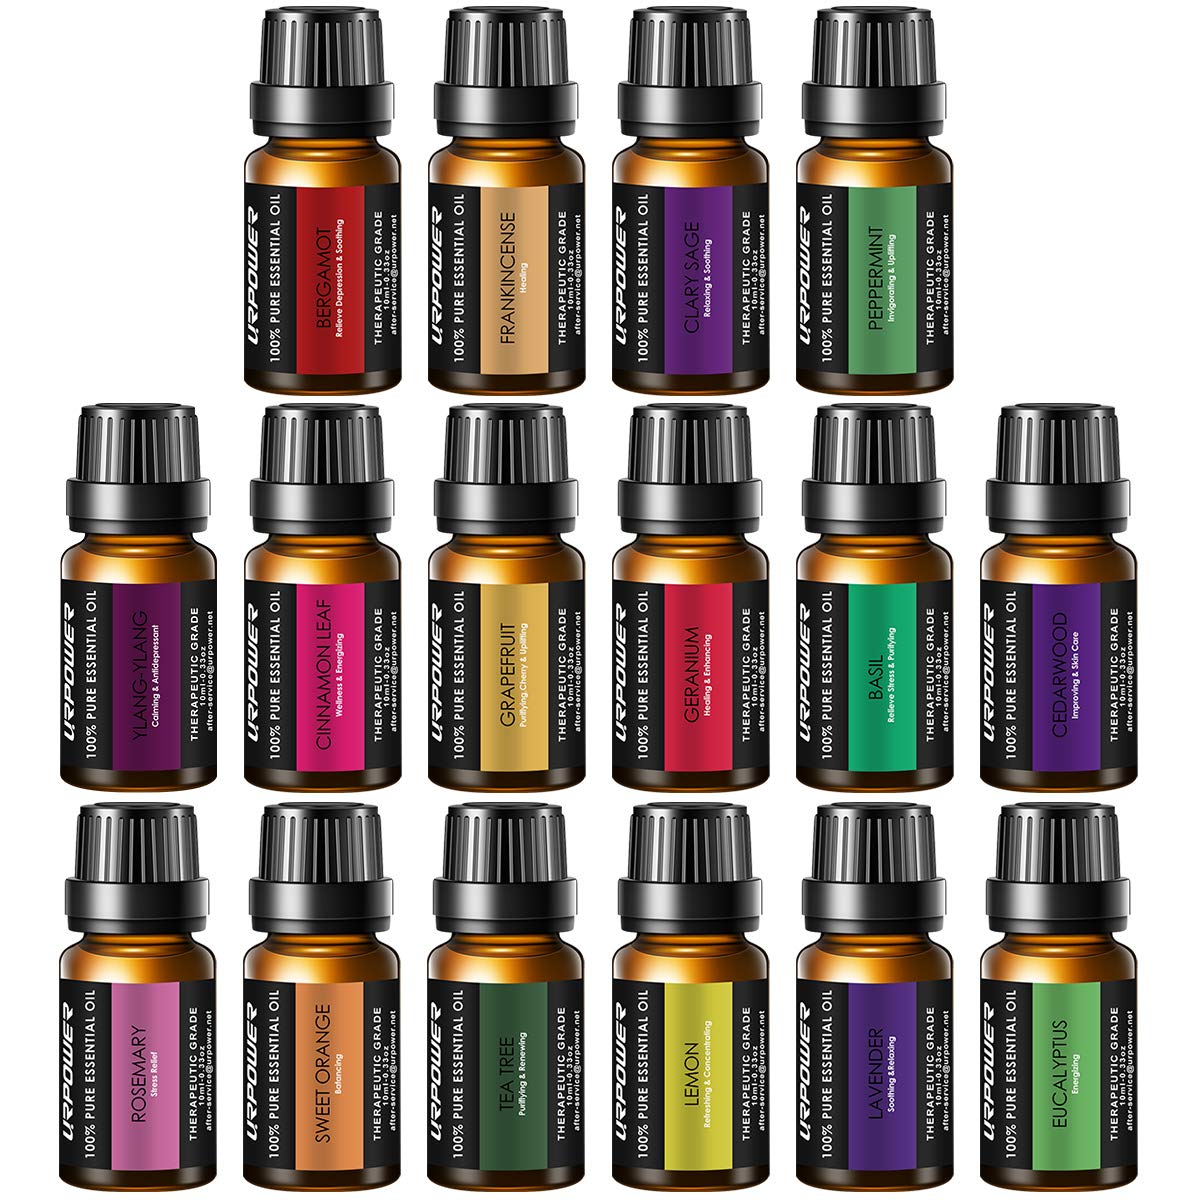 URPOWER Essential Oils, 16x10ml 100% Pure Aromatherapy Essential Oil Gift Set with Lavender, Sweet Orange, Peppermint, Lemon, Rosemary, Grapefruit, etc for Essential Oil Diffuser, Massage, Spa